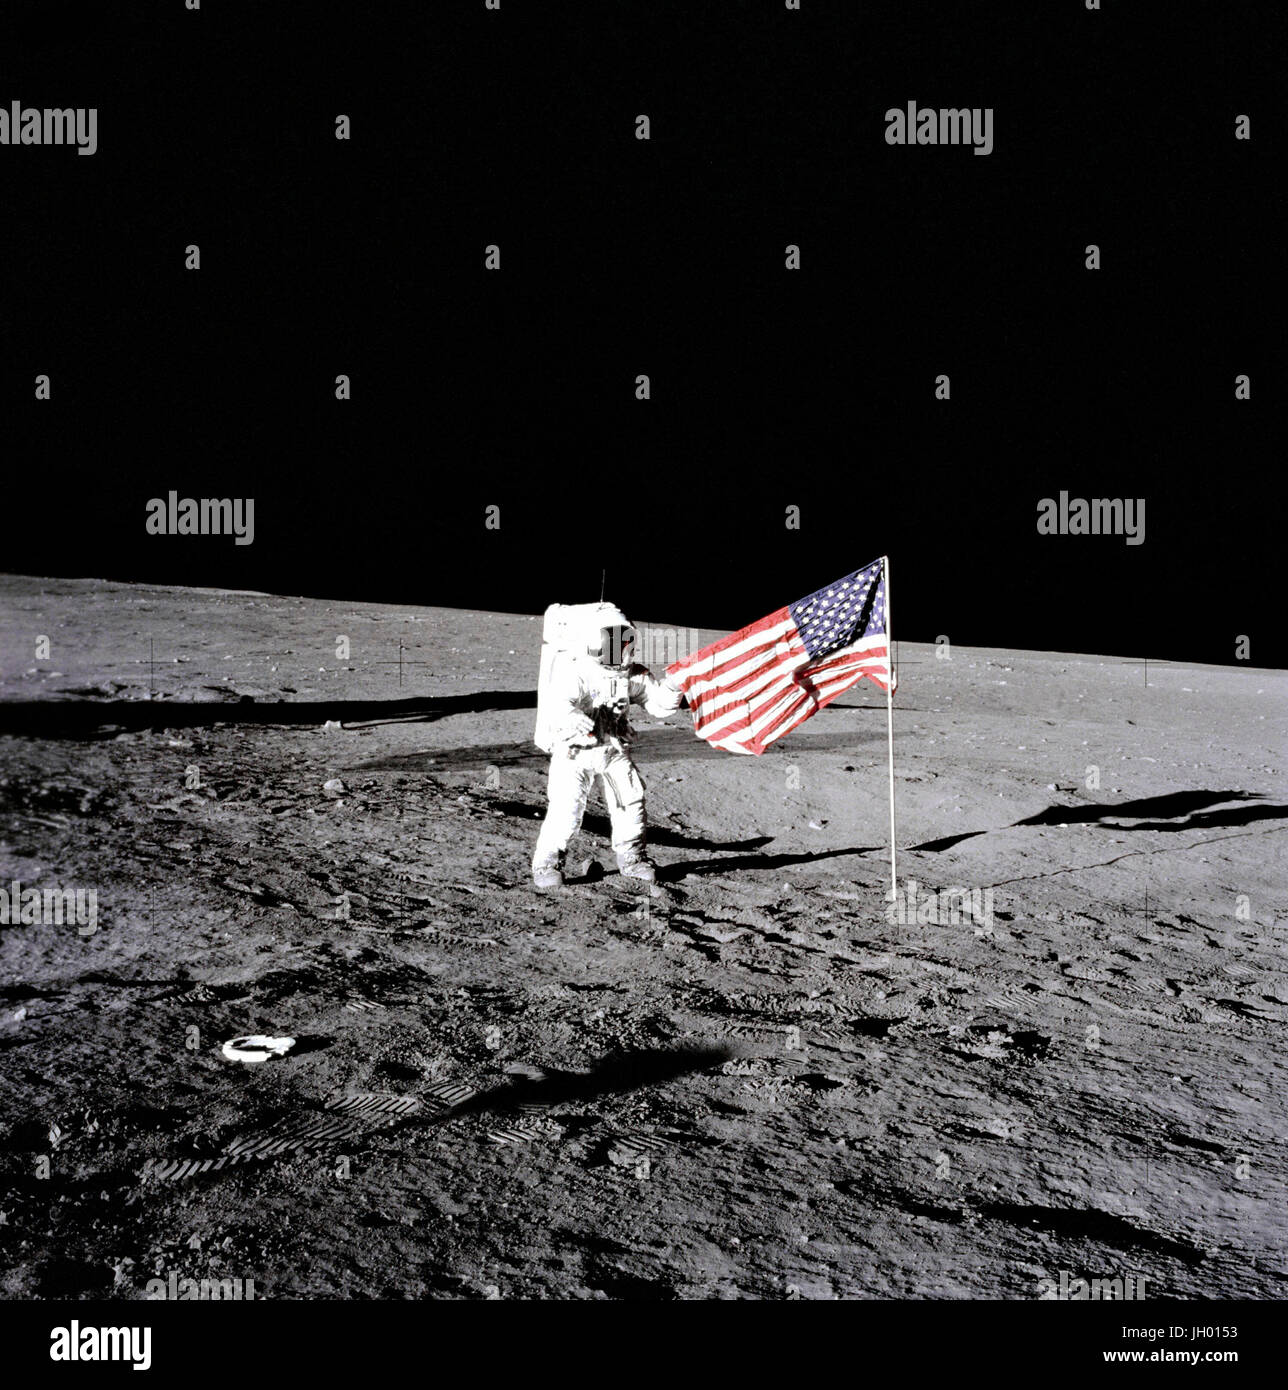 Conrad Unfurls Flag. Apollo 12 astronaut Charles 'Pete' Conrad stands beside the United States flag after is was unfurled on the lunar surface during the first extravehicular activity (EVA-1), on November 19, 1969. Several footprints made by the crew can be seen in the photograph. Photographer: NASA Alan Bean Stock Photo